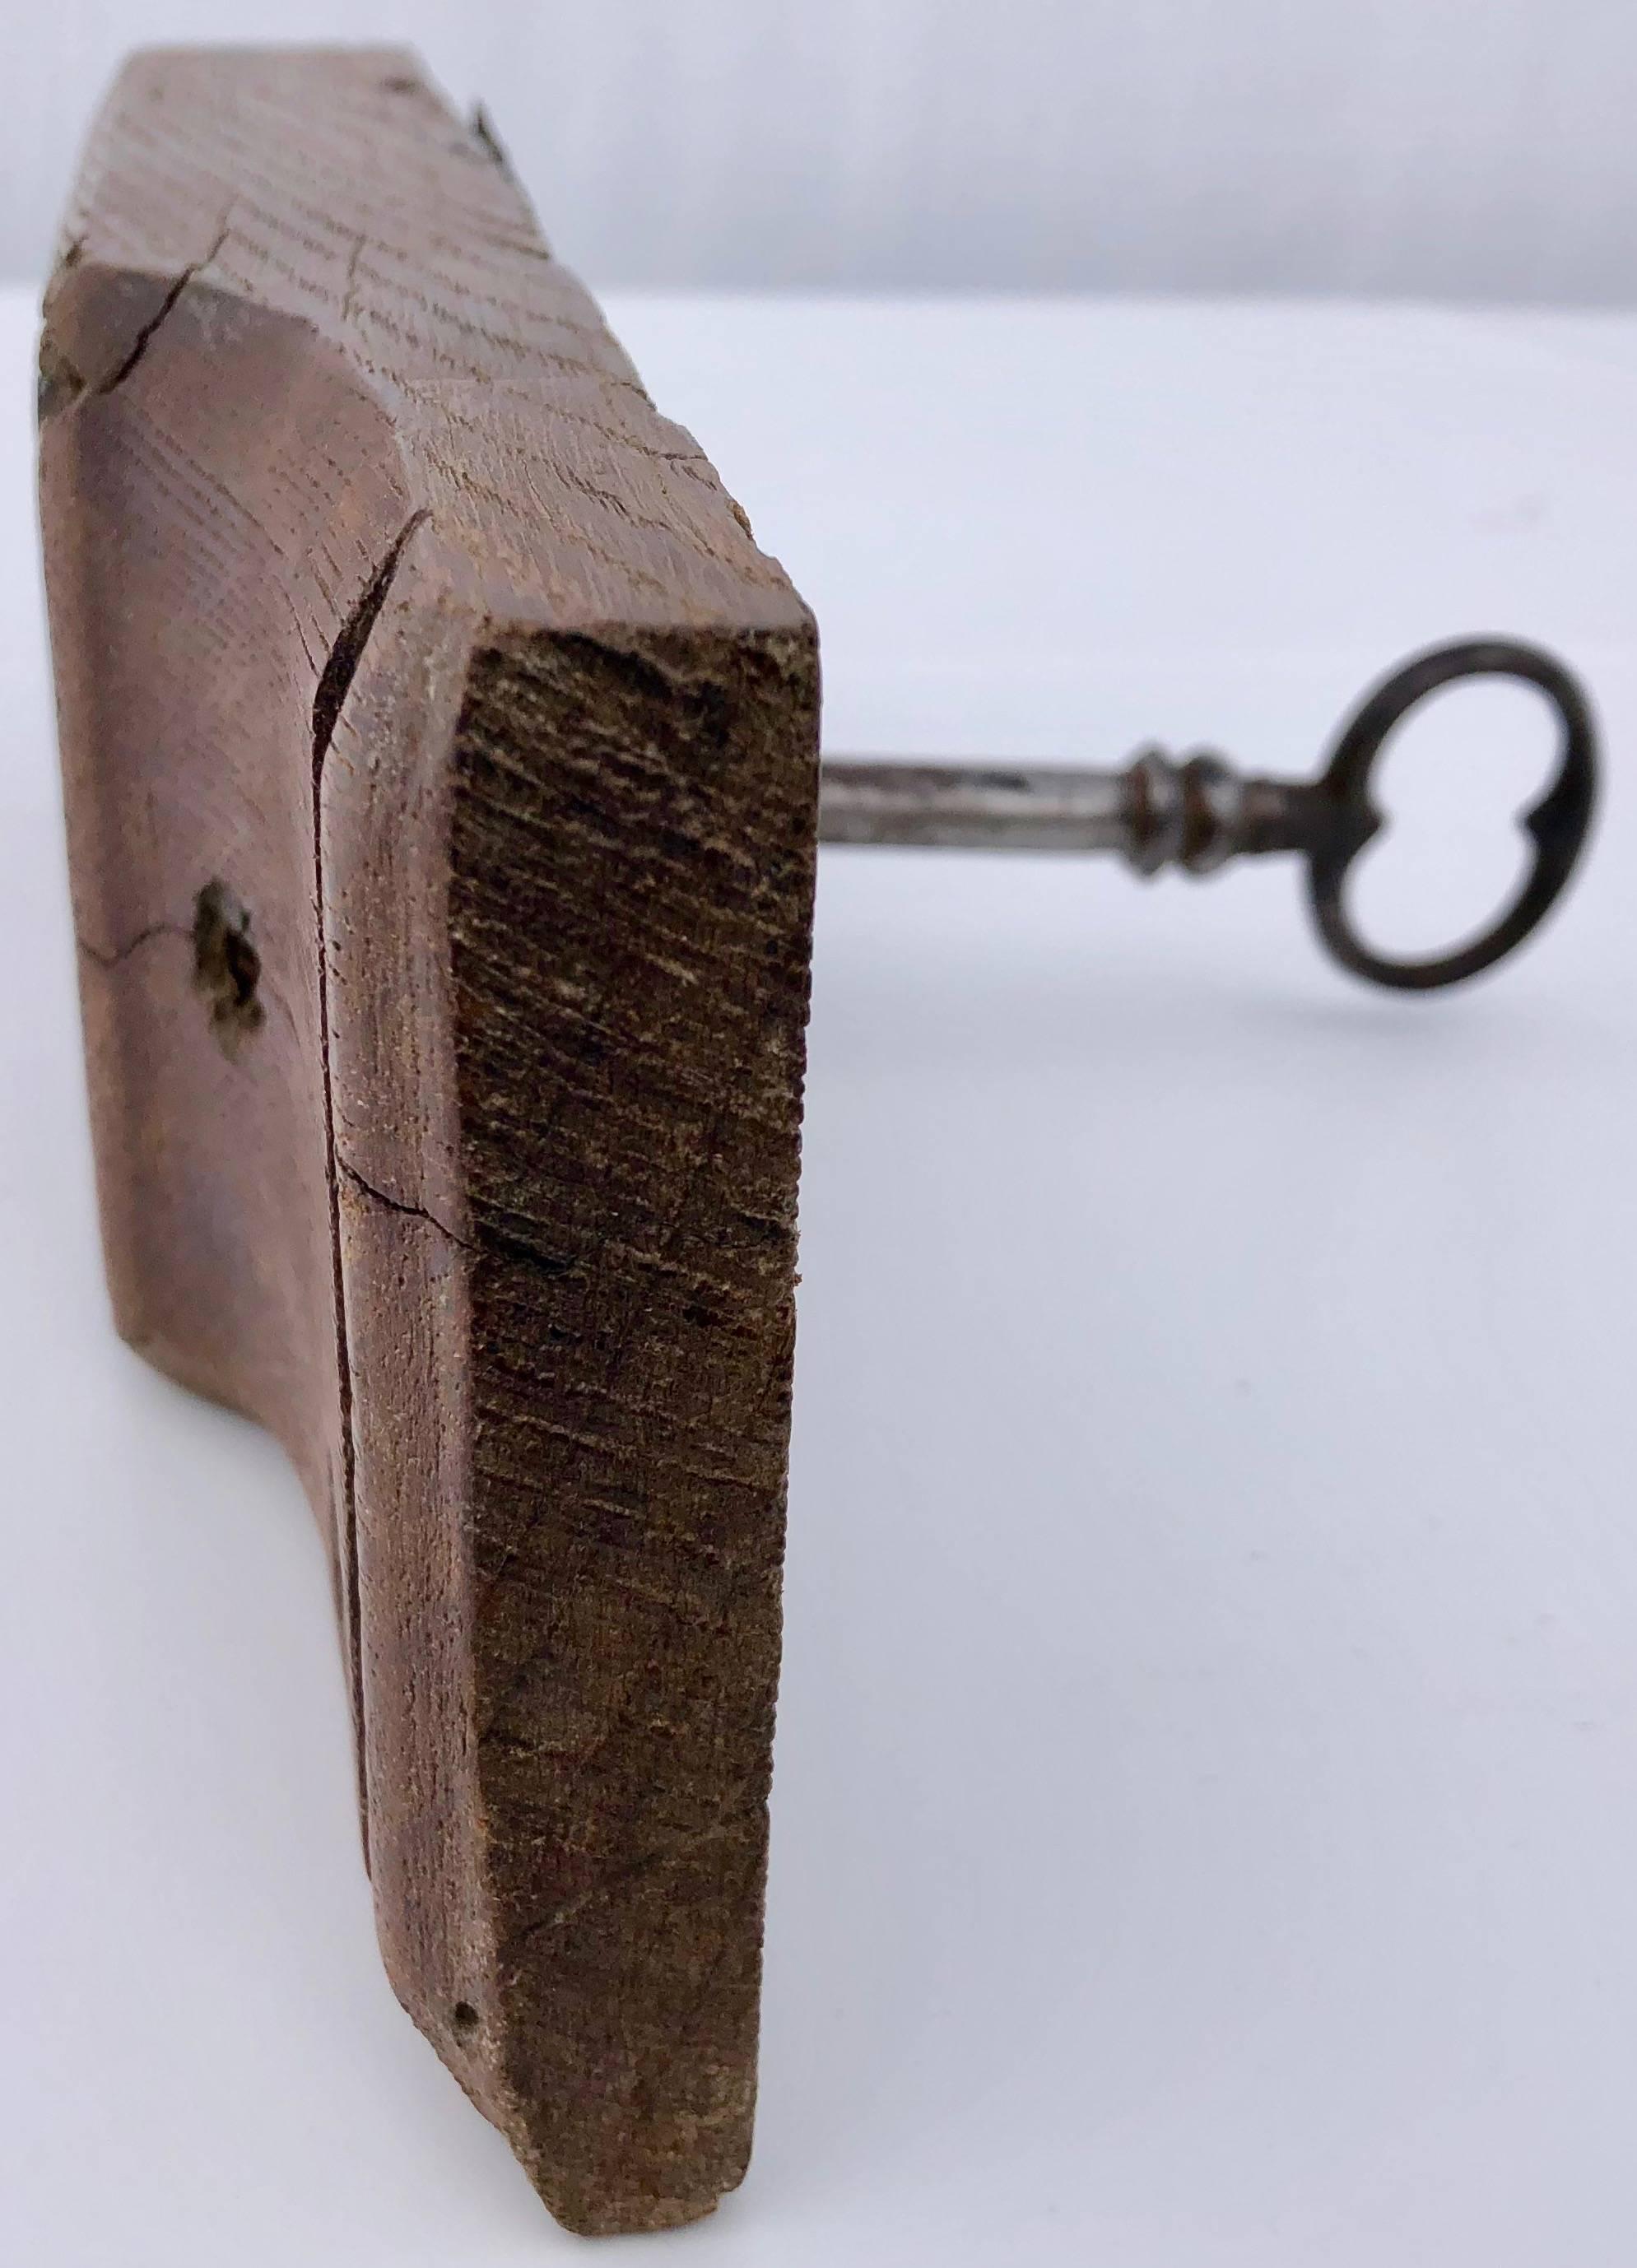 Louis XVI French Hand-Wrought Iron Mortise Mount Lock with Key on Wood Base, 1700s-1800s